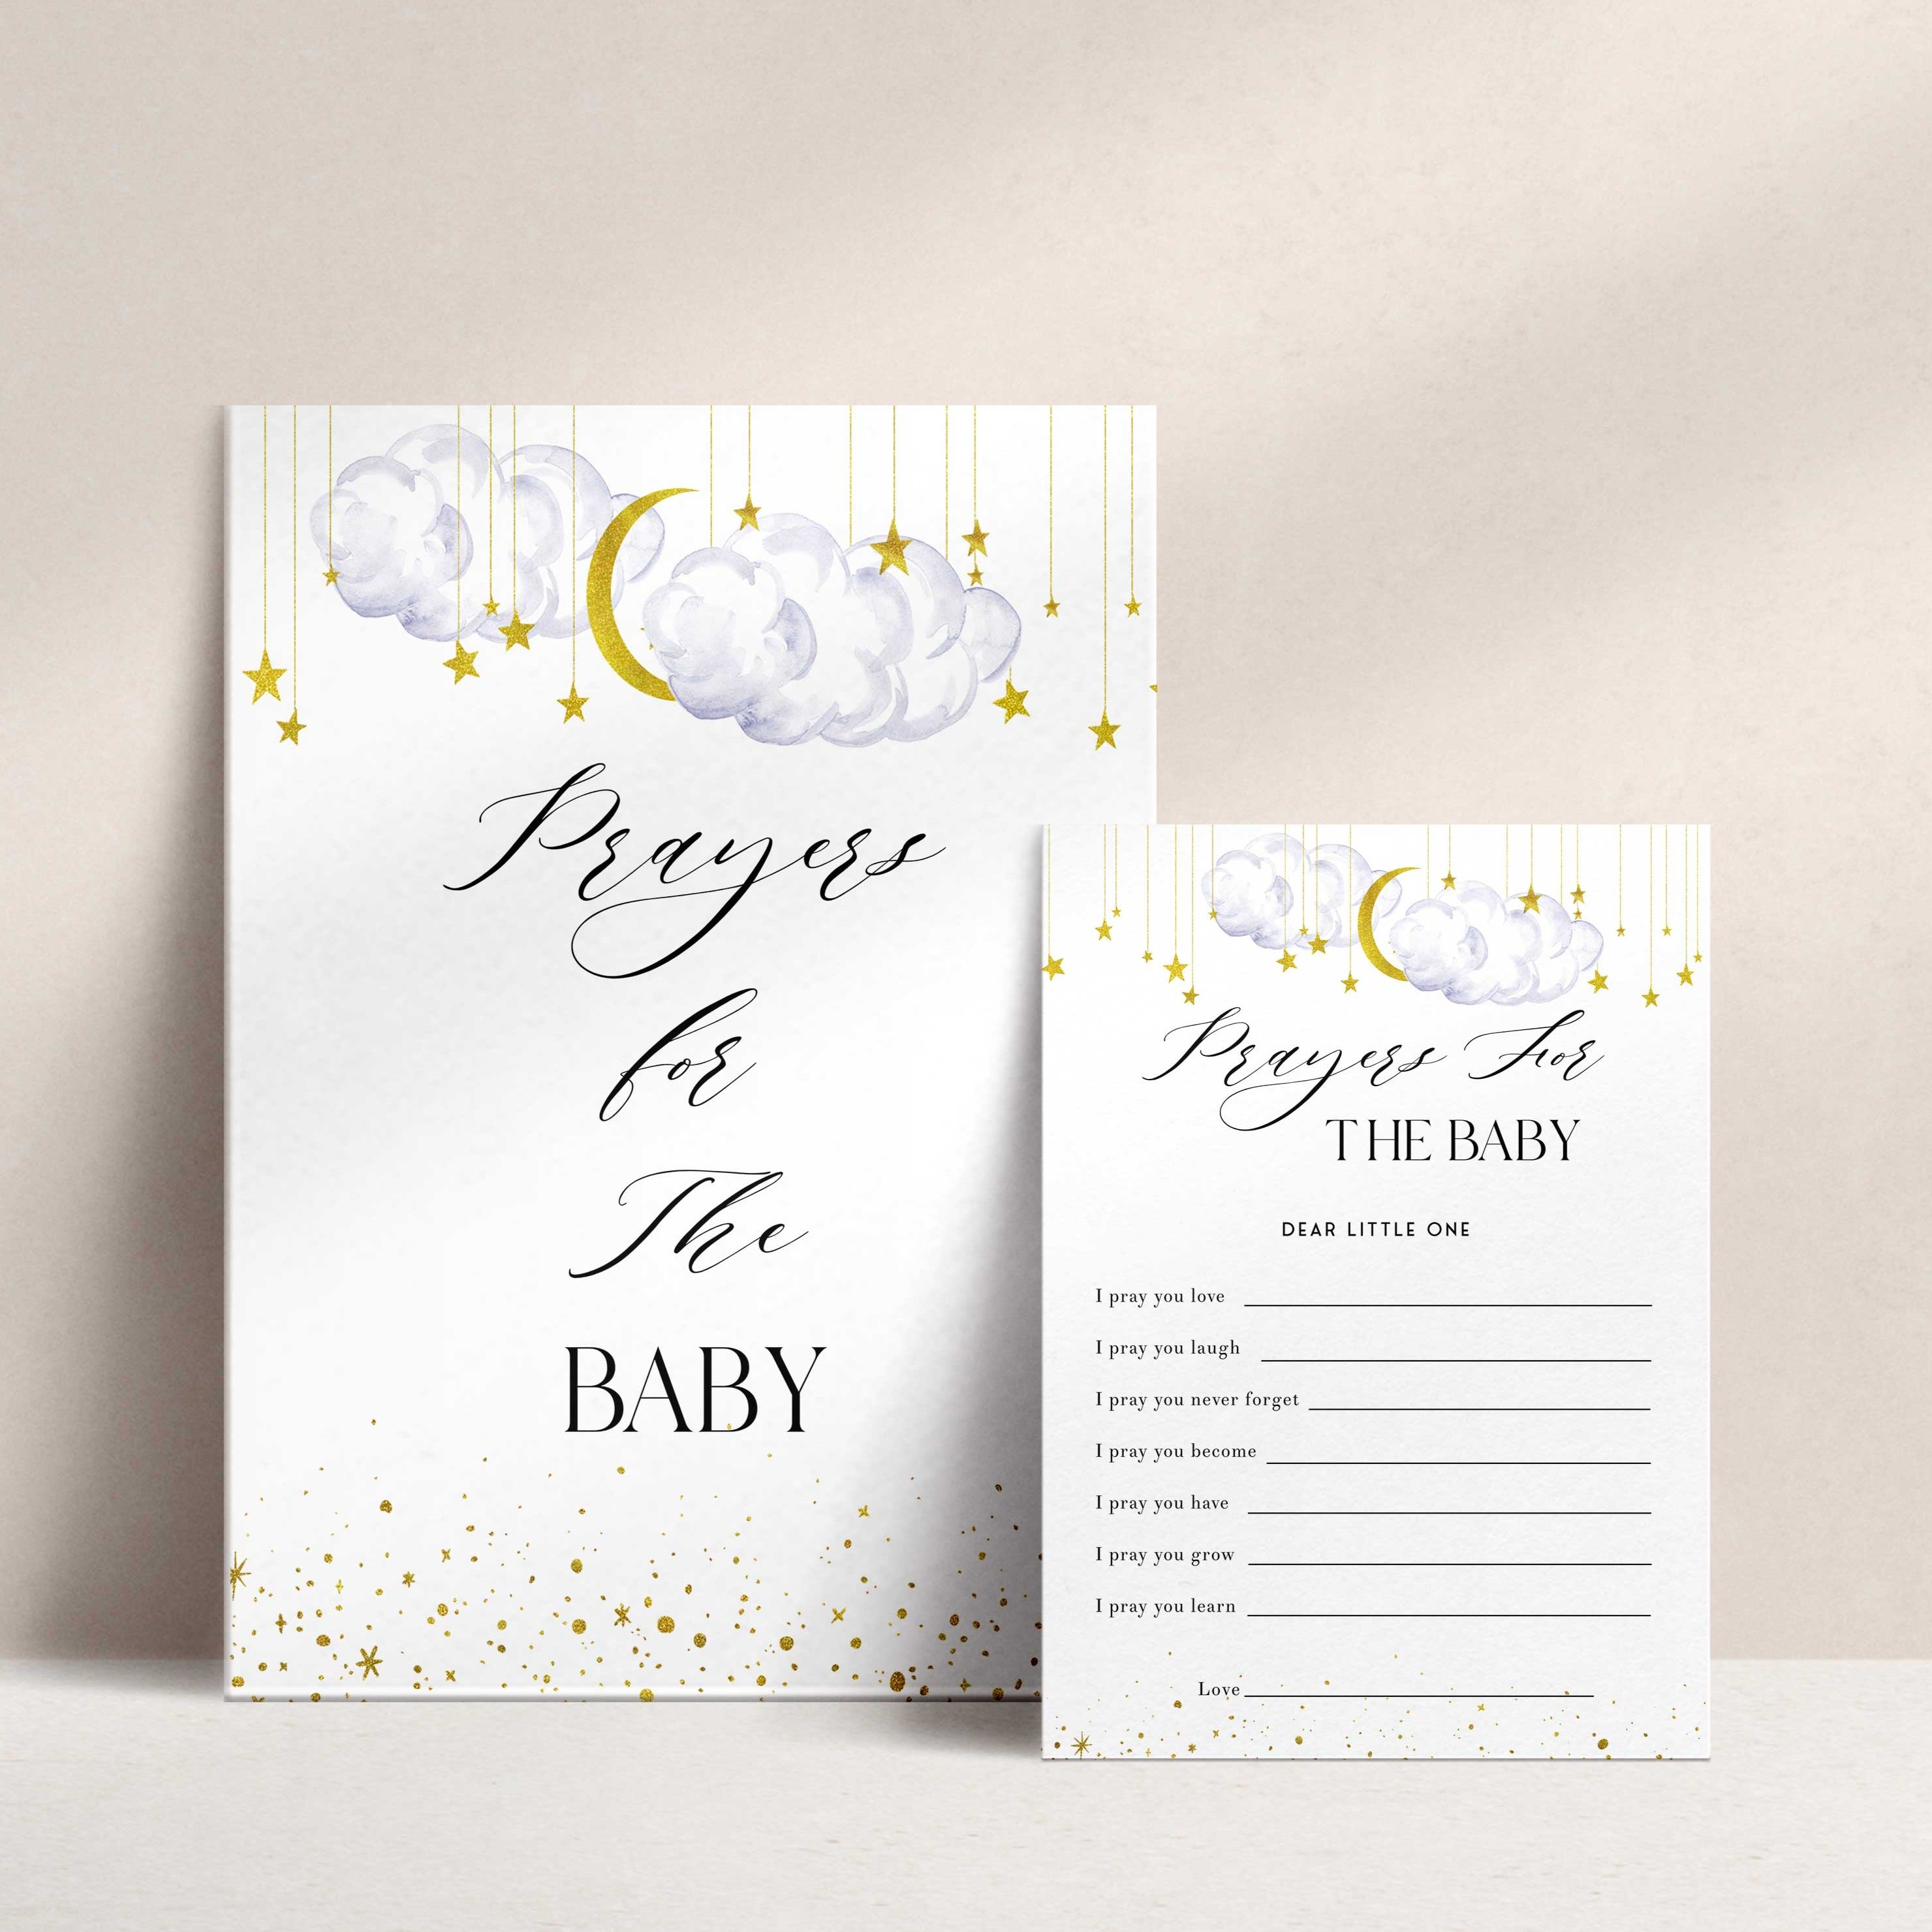 Fully editable and printable baby shower prayers for the baby game with a little star design. Perfect for a Twinkle Little Star baby shower themed party